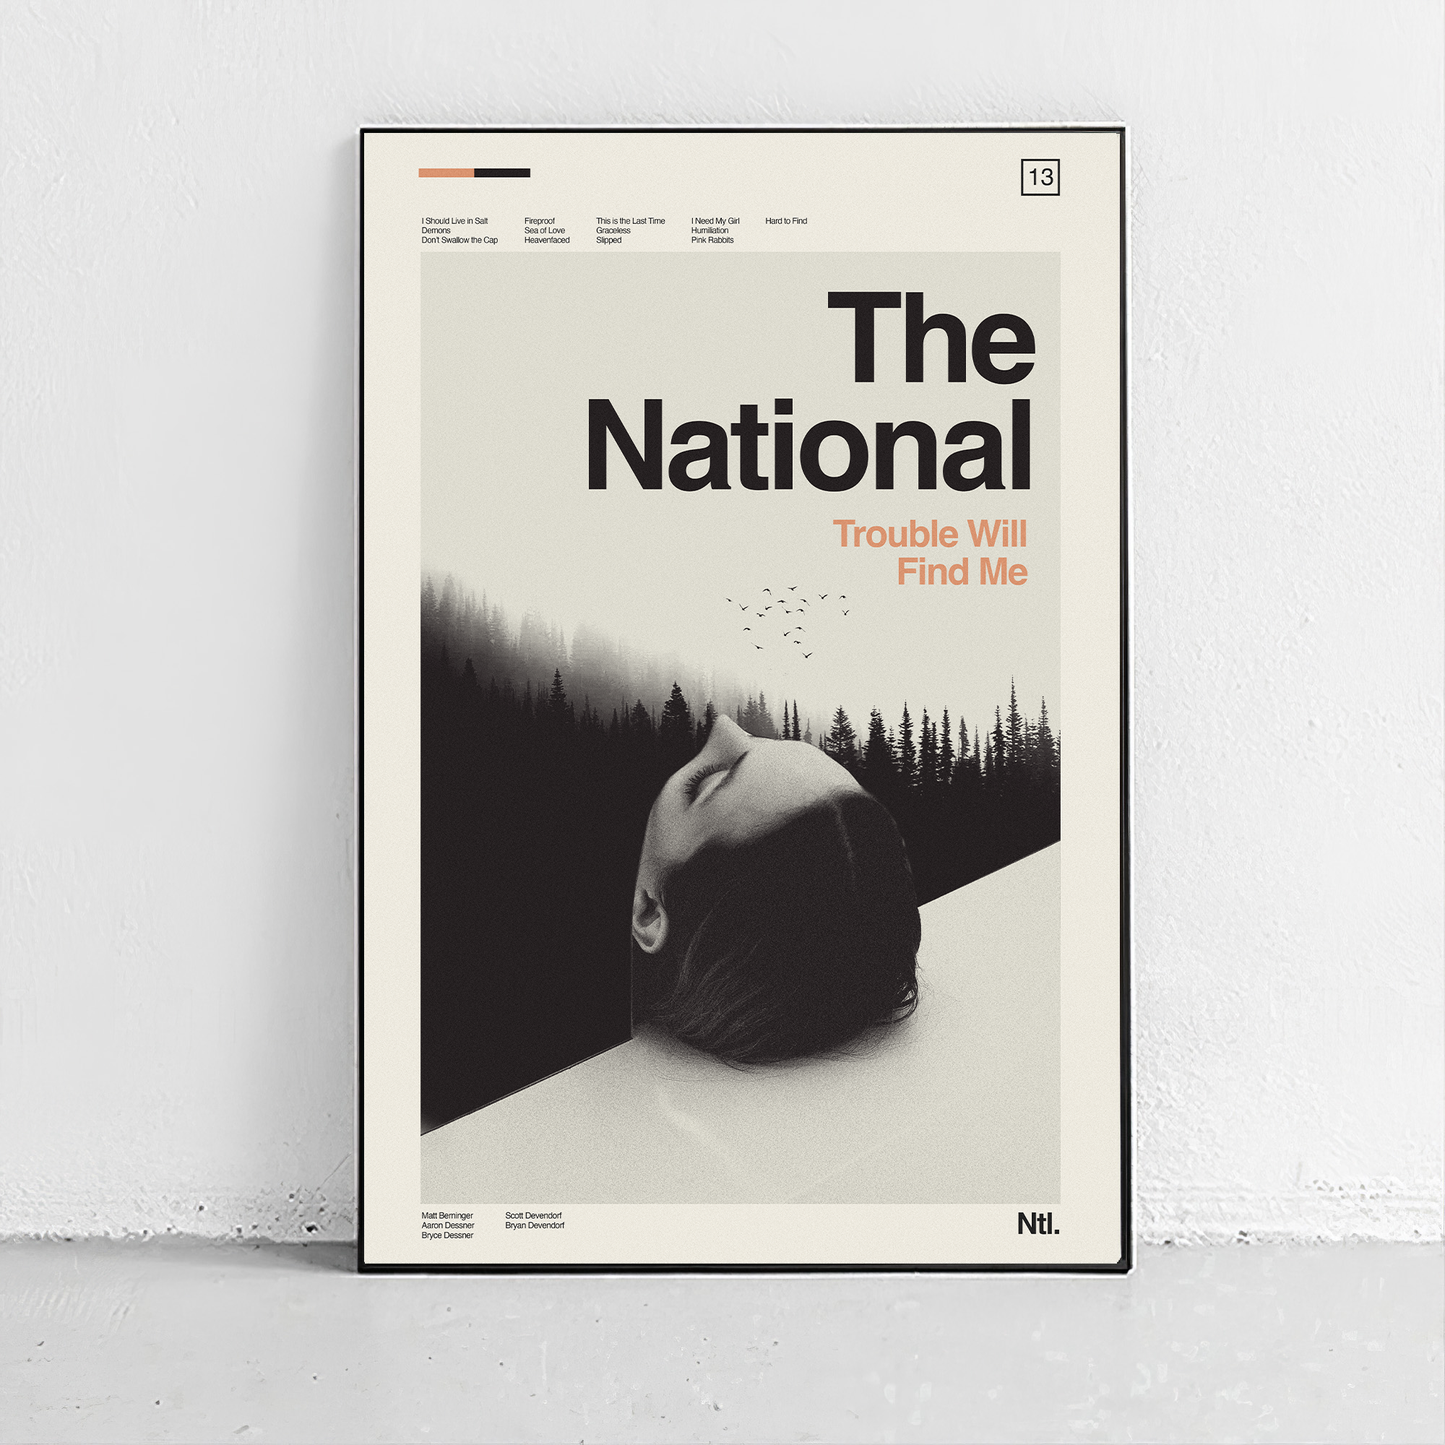 The National- Trouble Will Find Me